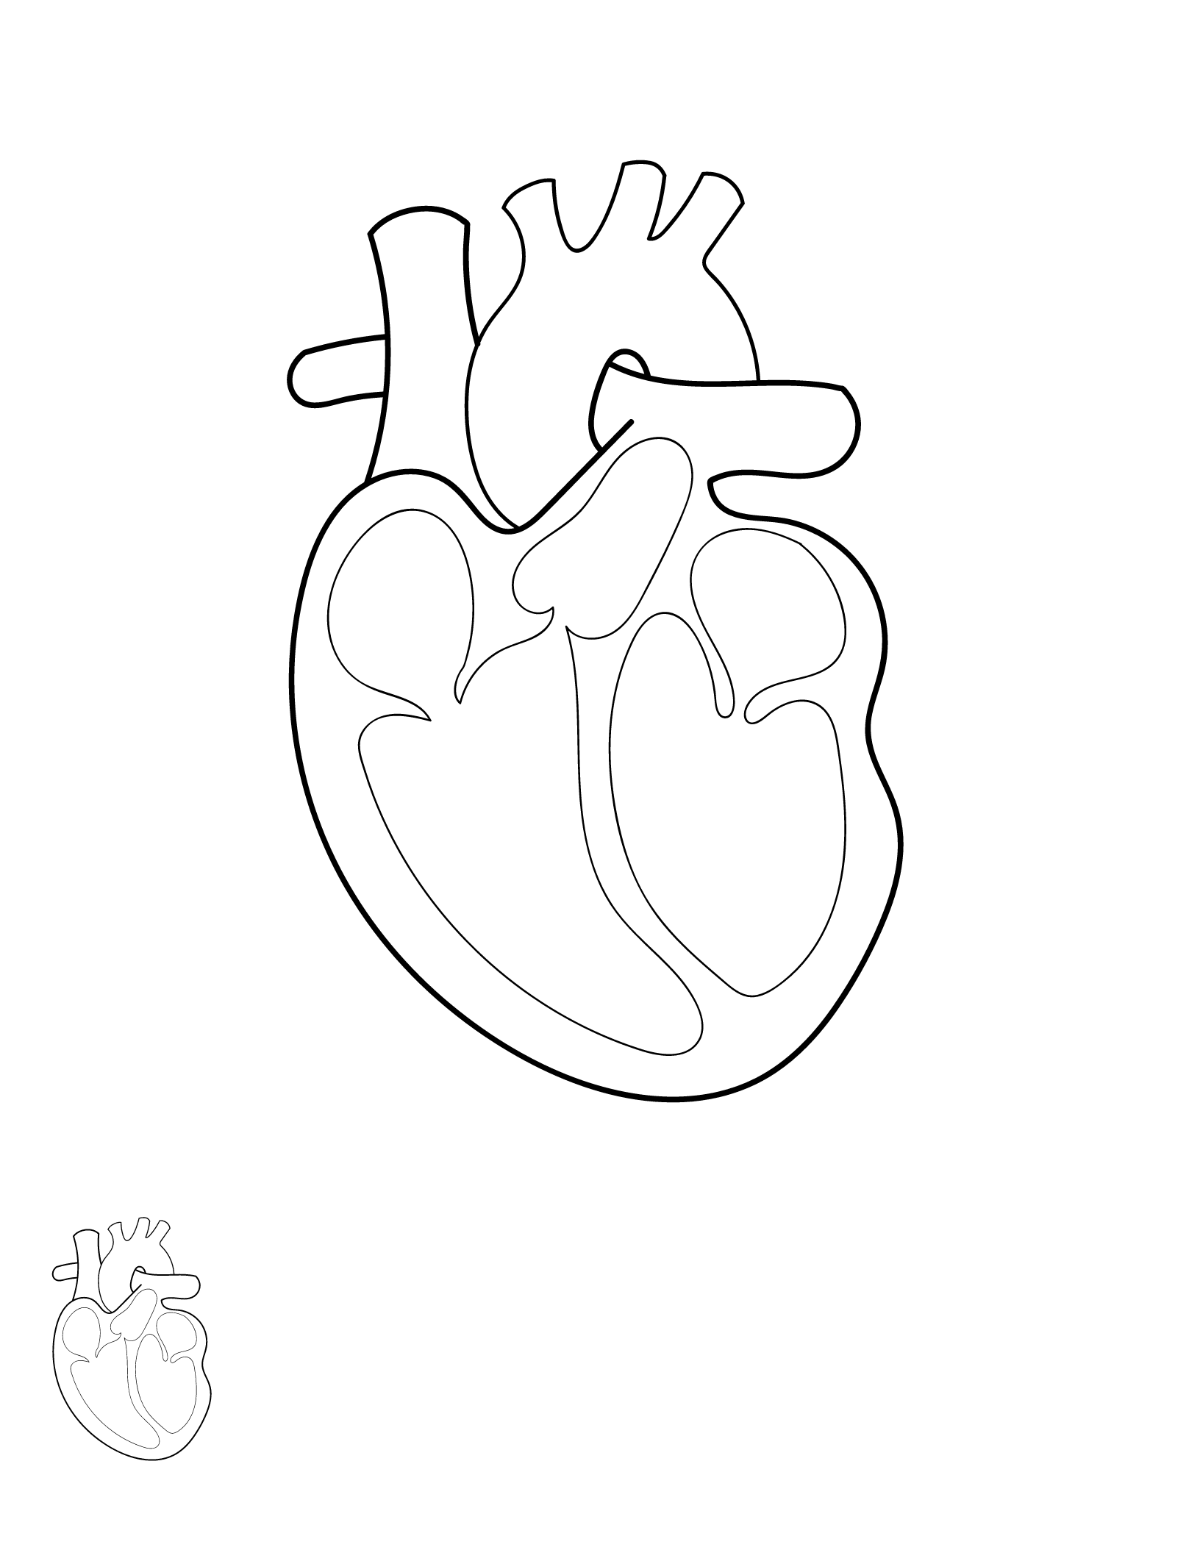 Anatomical Heart Coloring Page Template